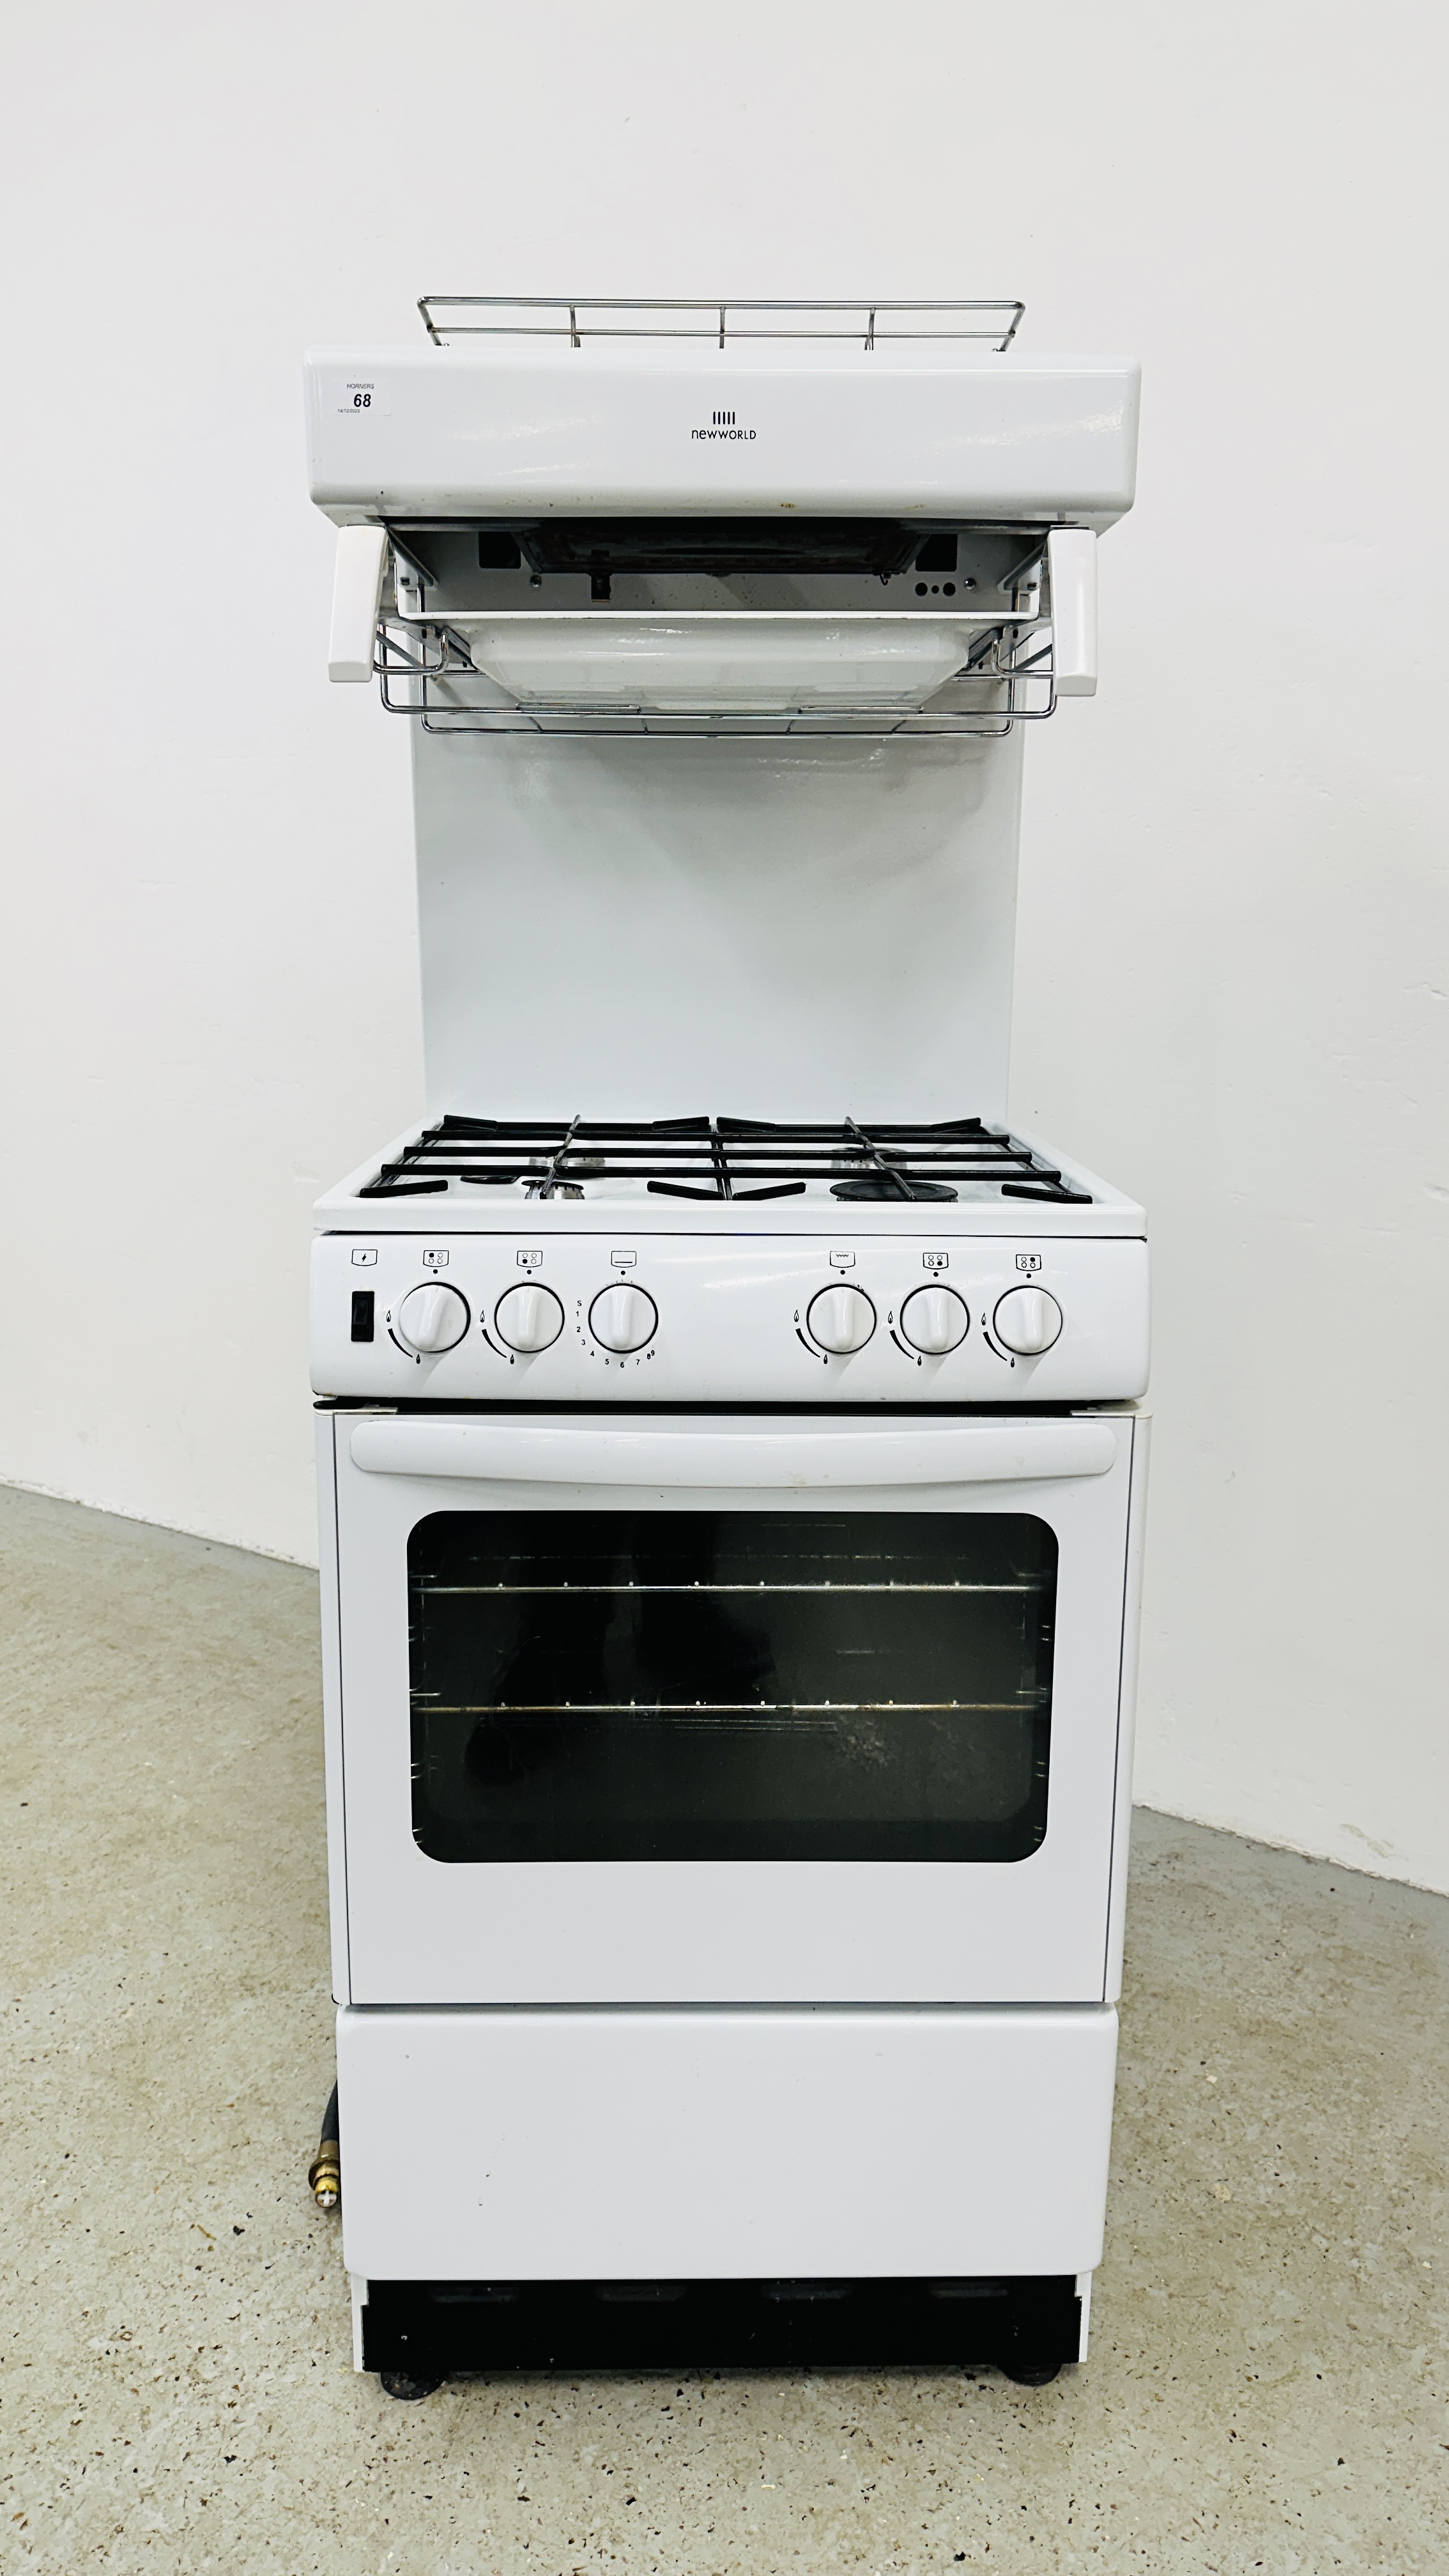 A NEW WORLD MAINS GAS COOKER - CONDITION OF SALE TO BE INSTALLED AND SERVICED BY GAS SAFE QUALIFIED